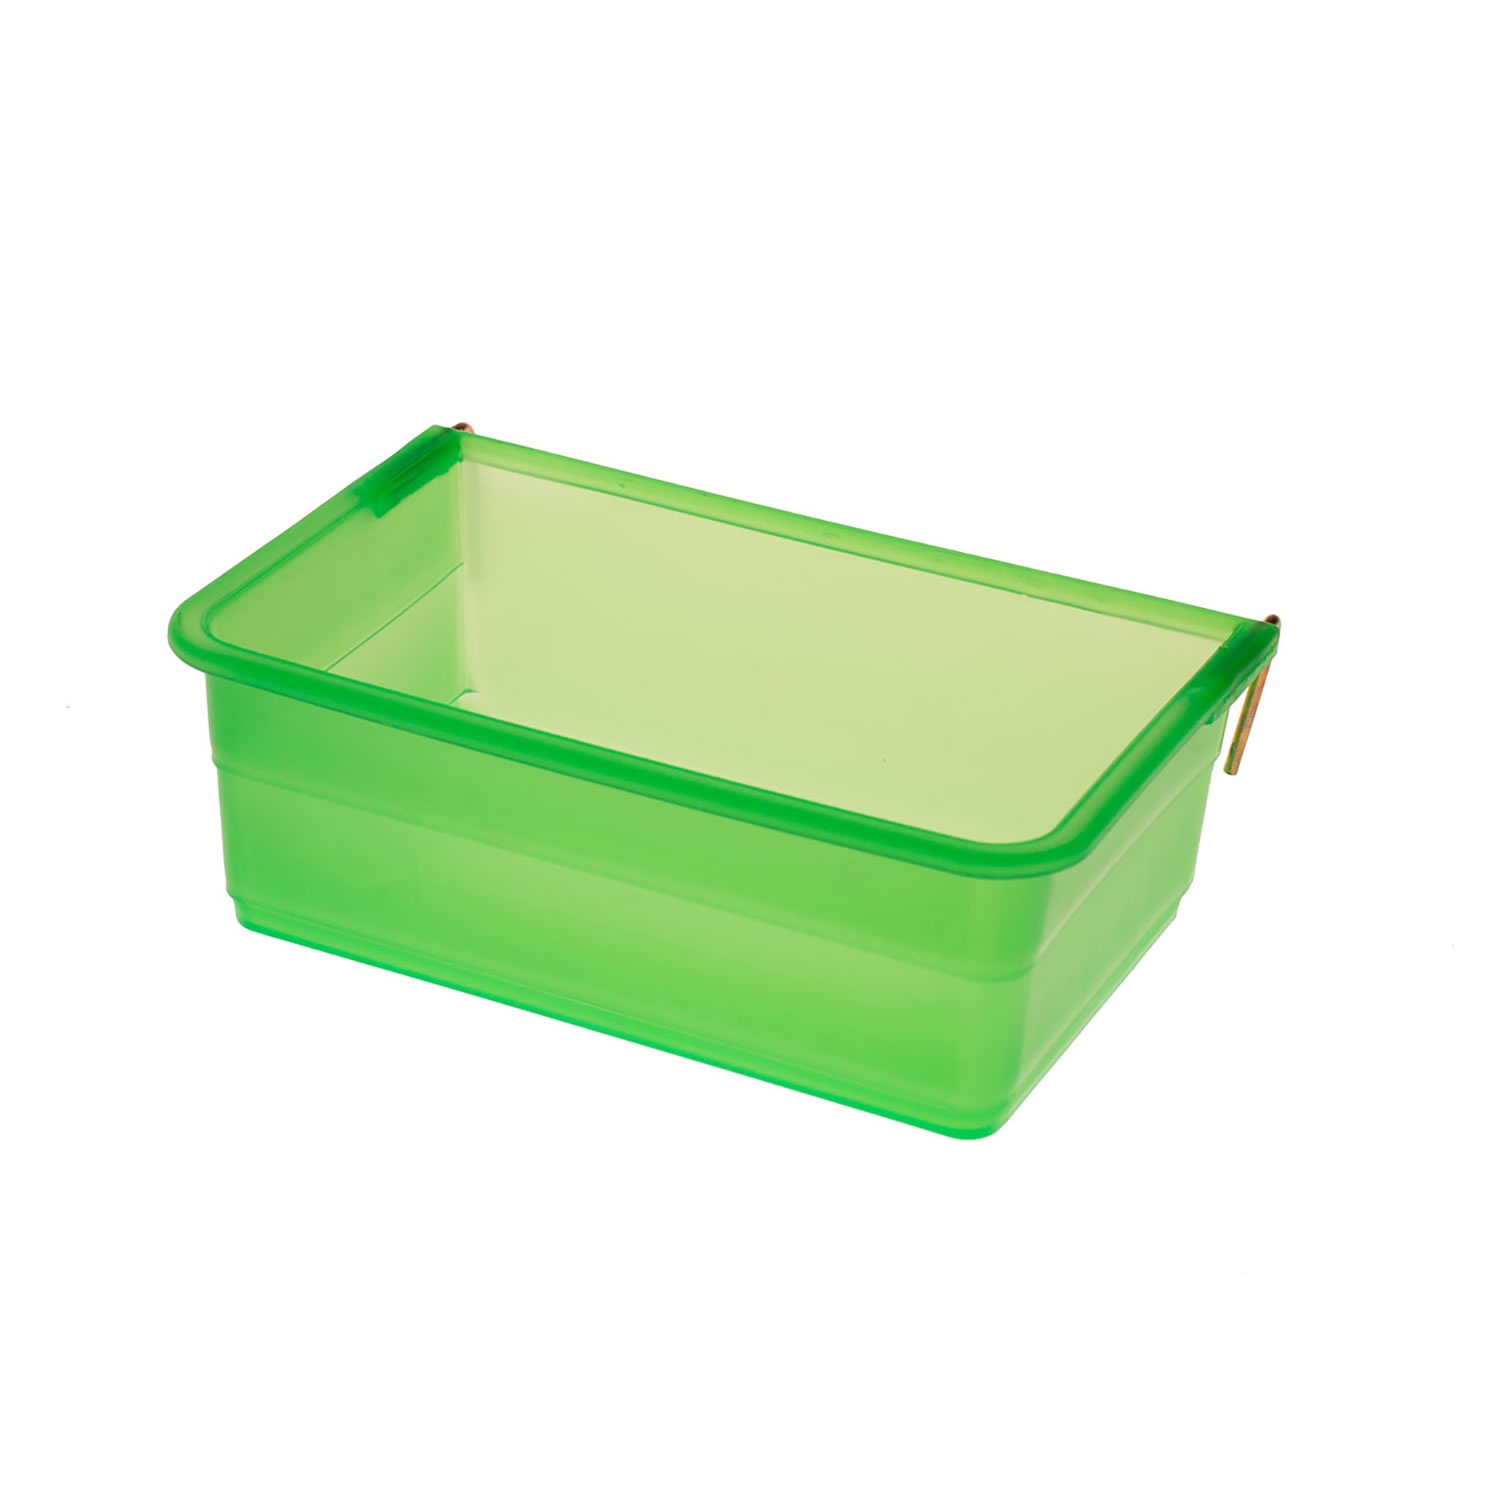 ETON PLASTIC HOOK ON RECTANGLE CUP GREEN   GREEN